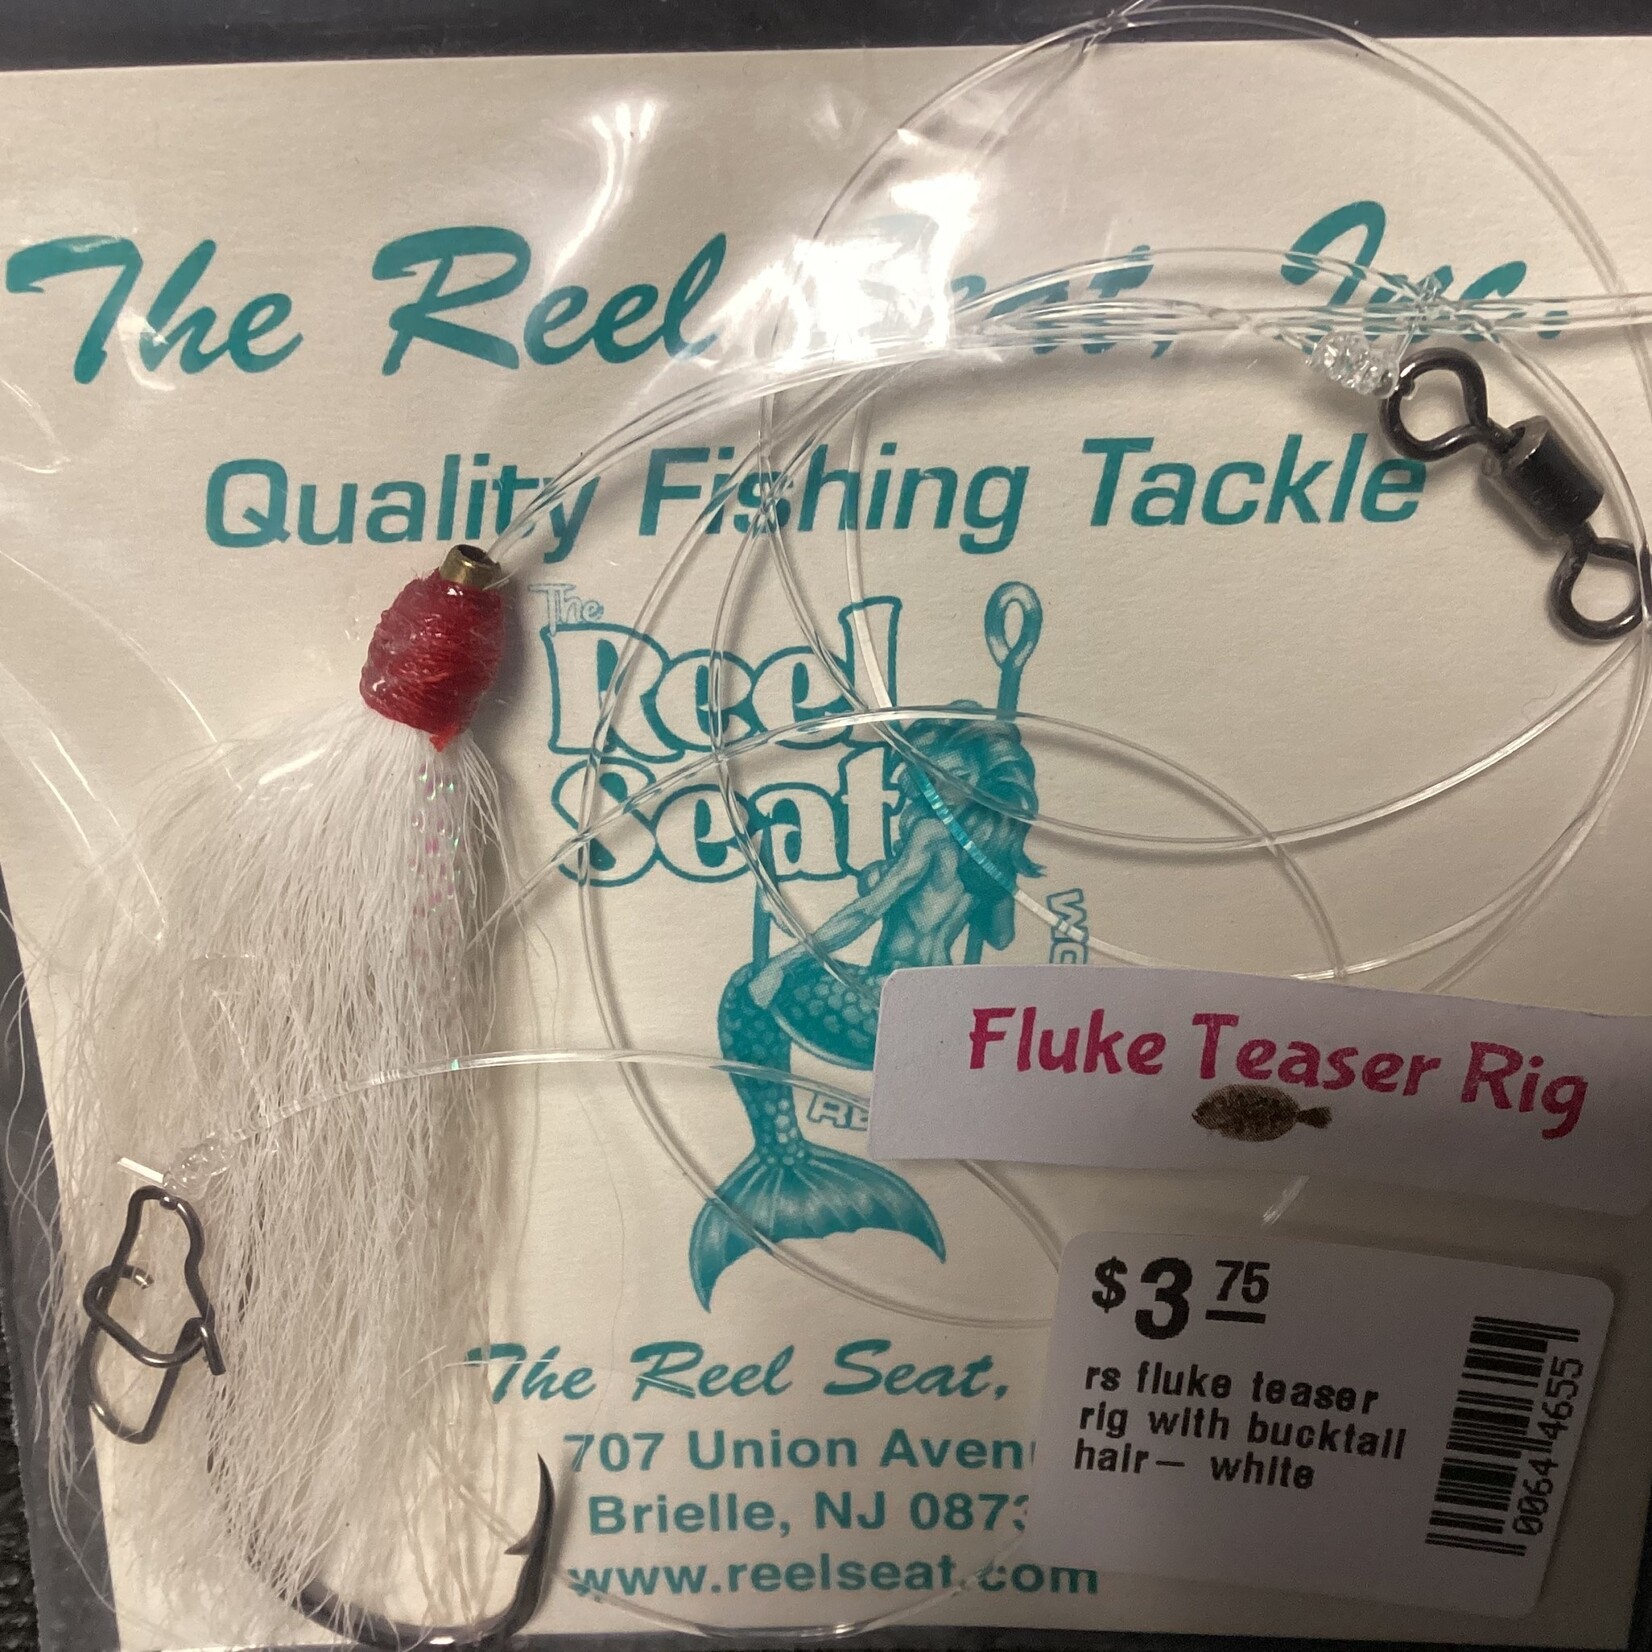 The Reel Seat RS fluke teaser rig with bucktail hair- white